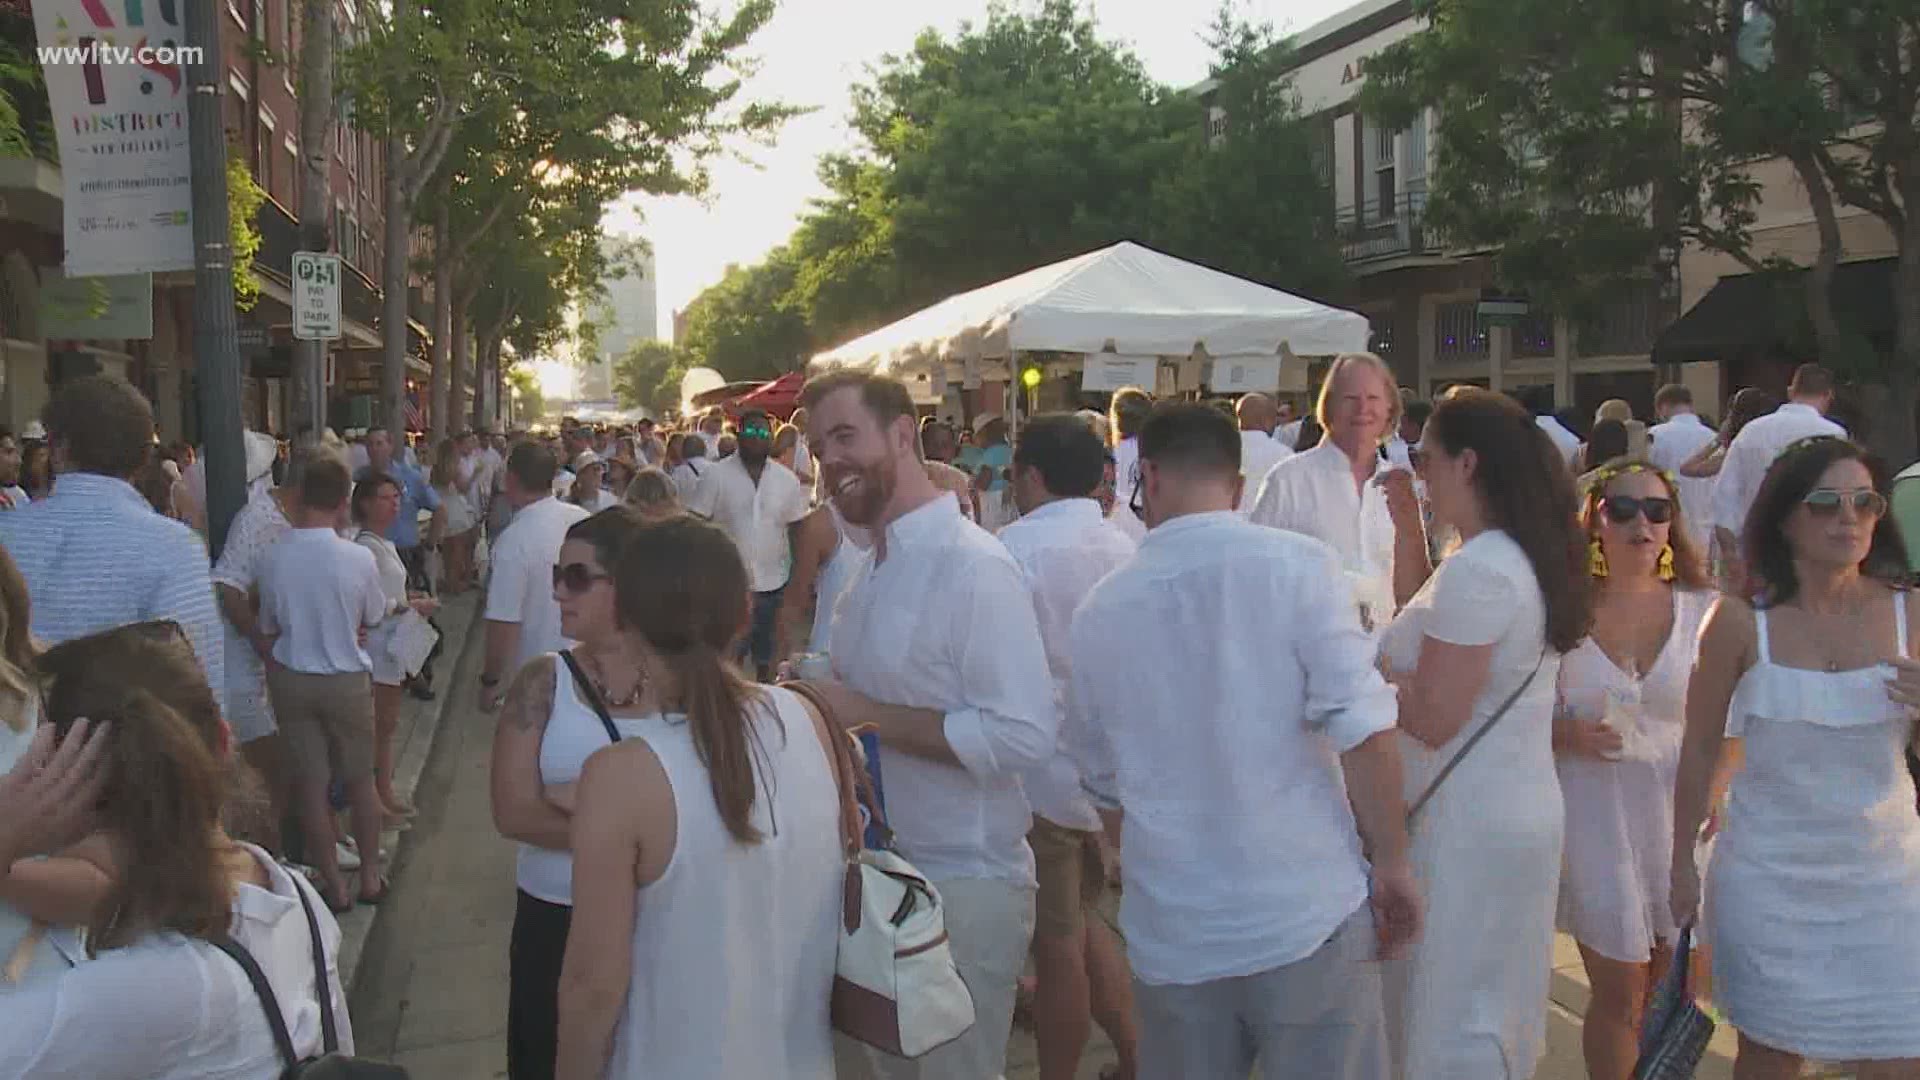 White Linen Night is going virtual as 'White Linen Lights' for the entire month of August amid the coronavirus pandemic.